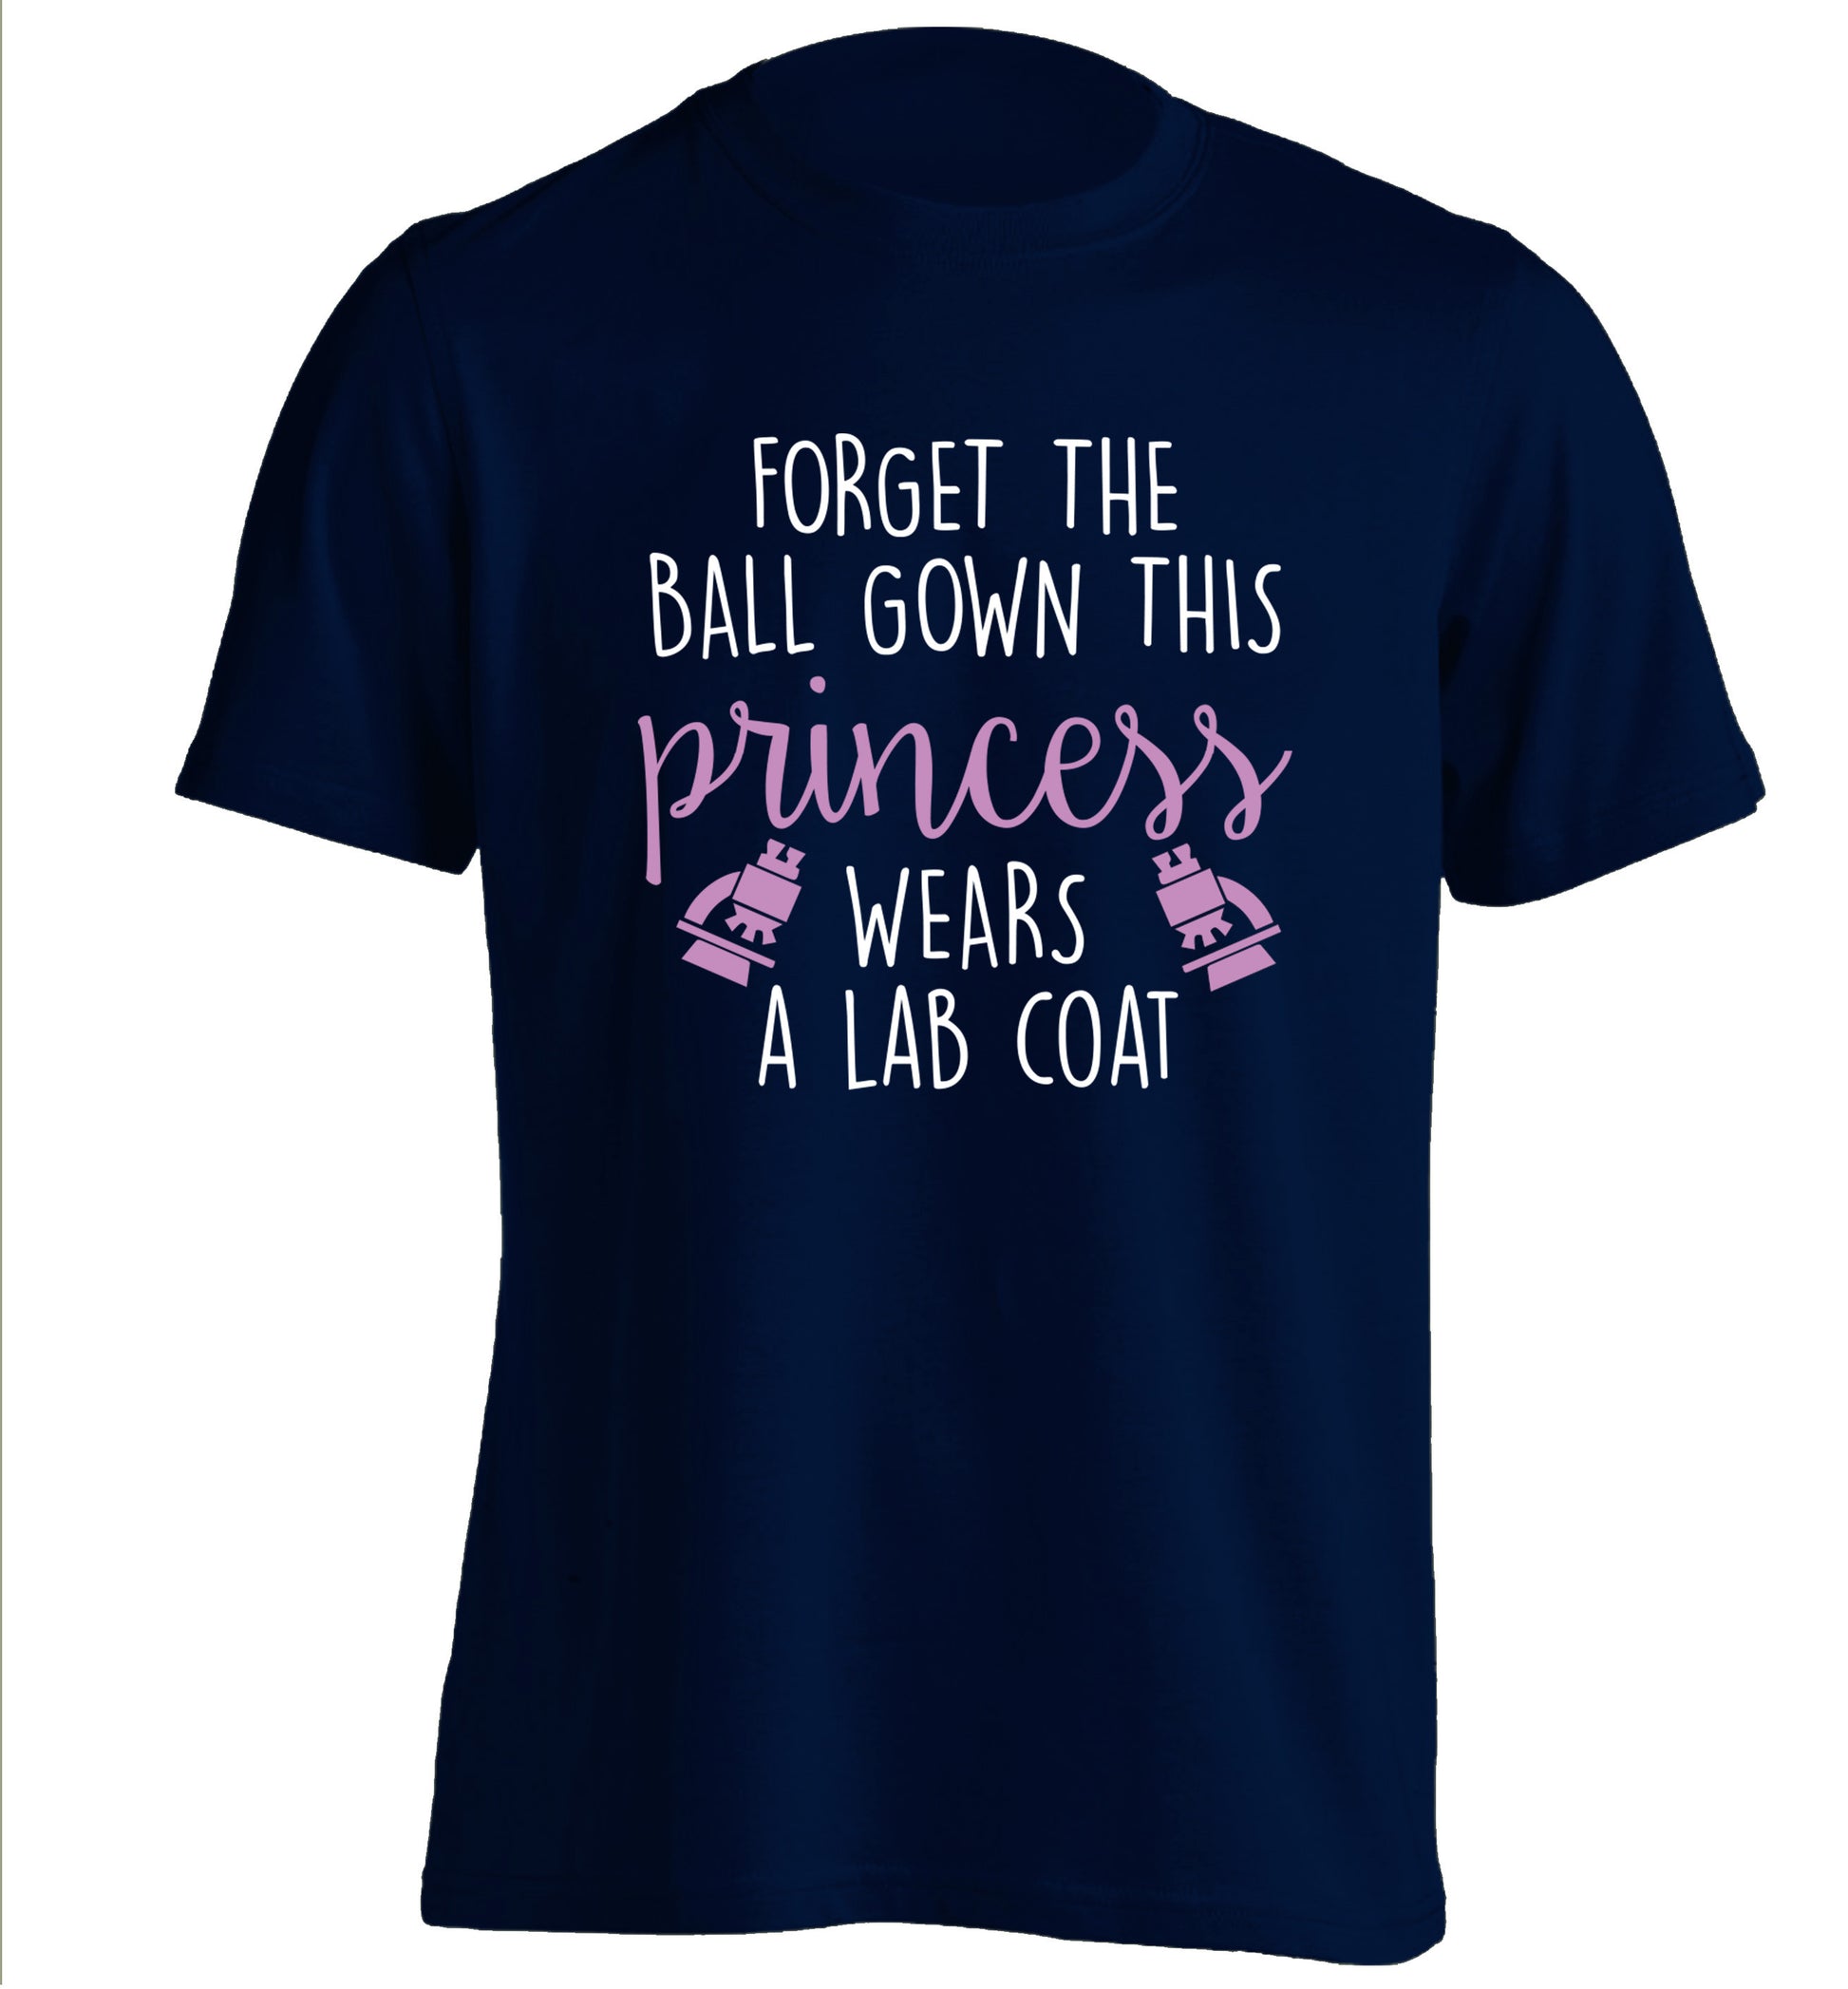 Forget the ball gown this princess wears a lab coat adults unisex navy Tshirt 2XL